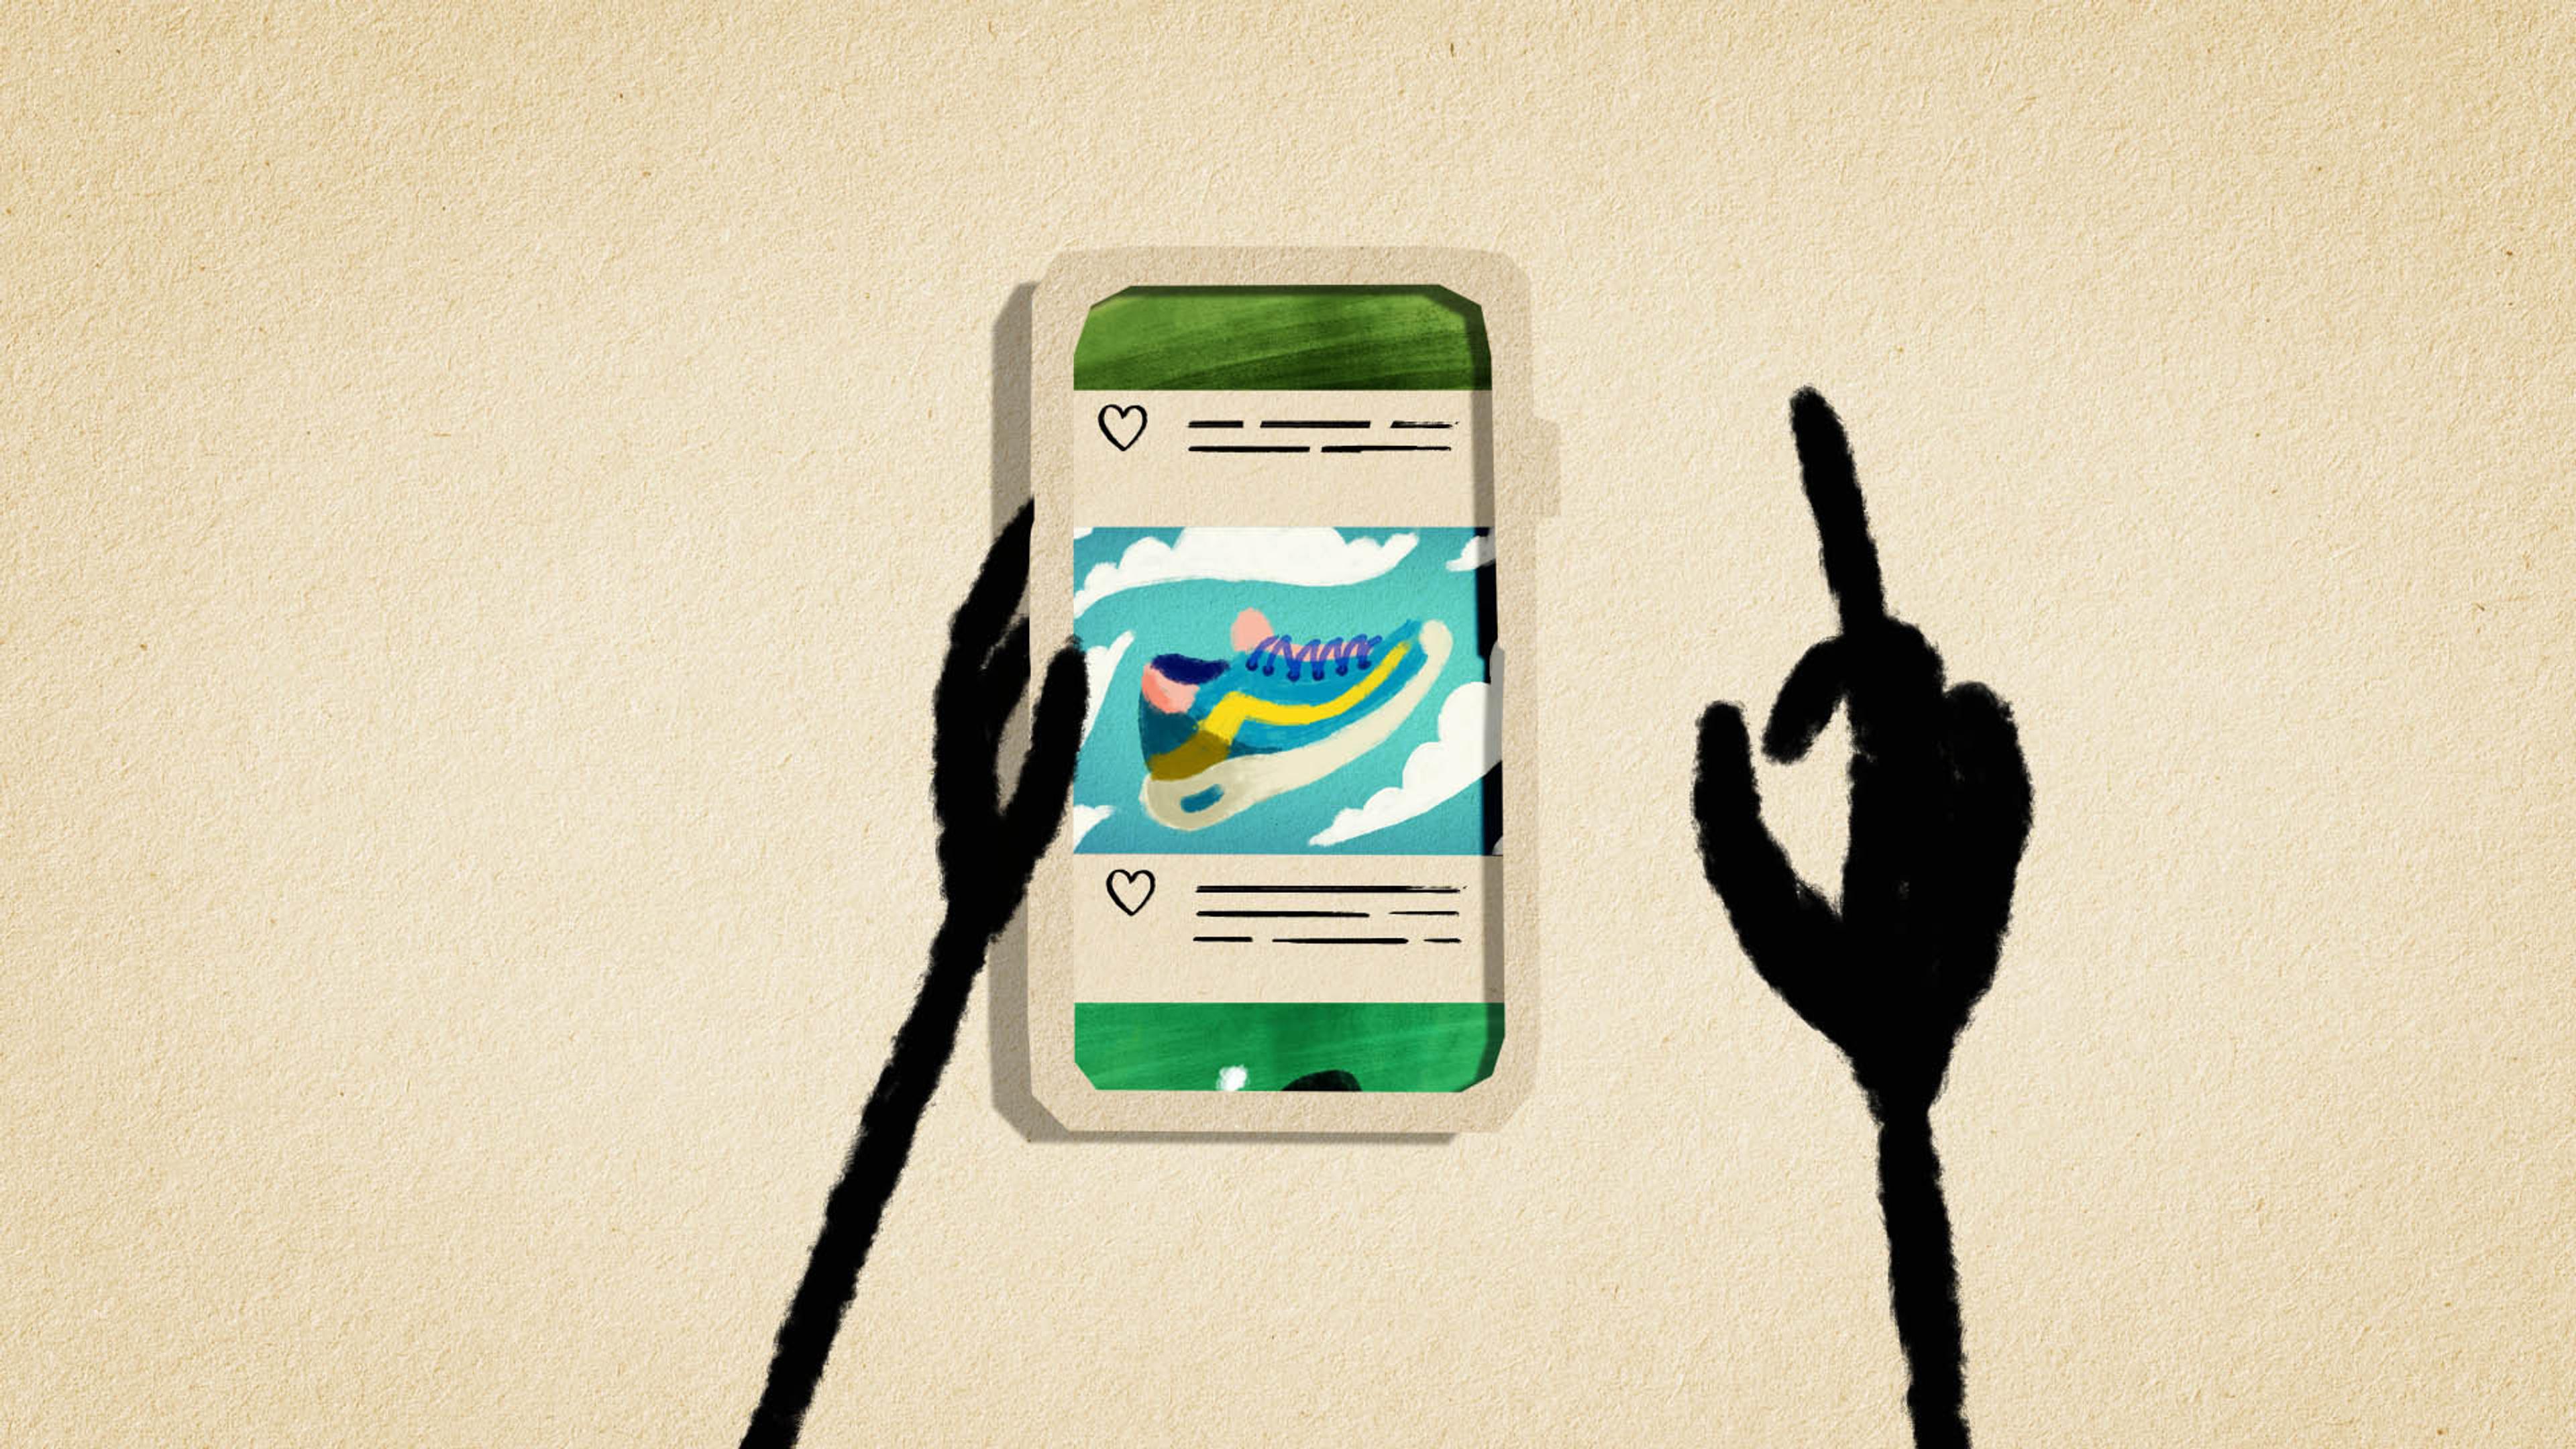 Illustration of two hands swiping on a smart phone.